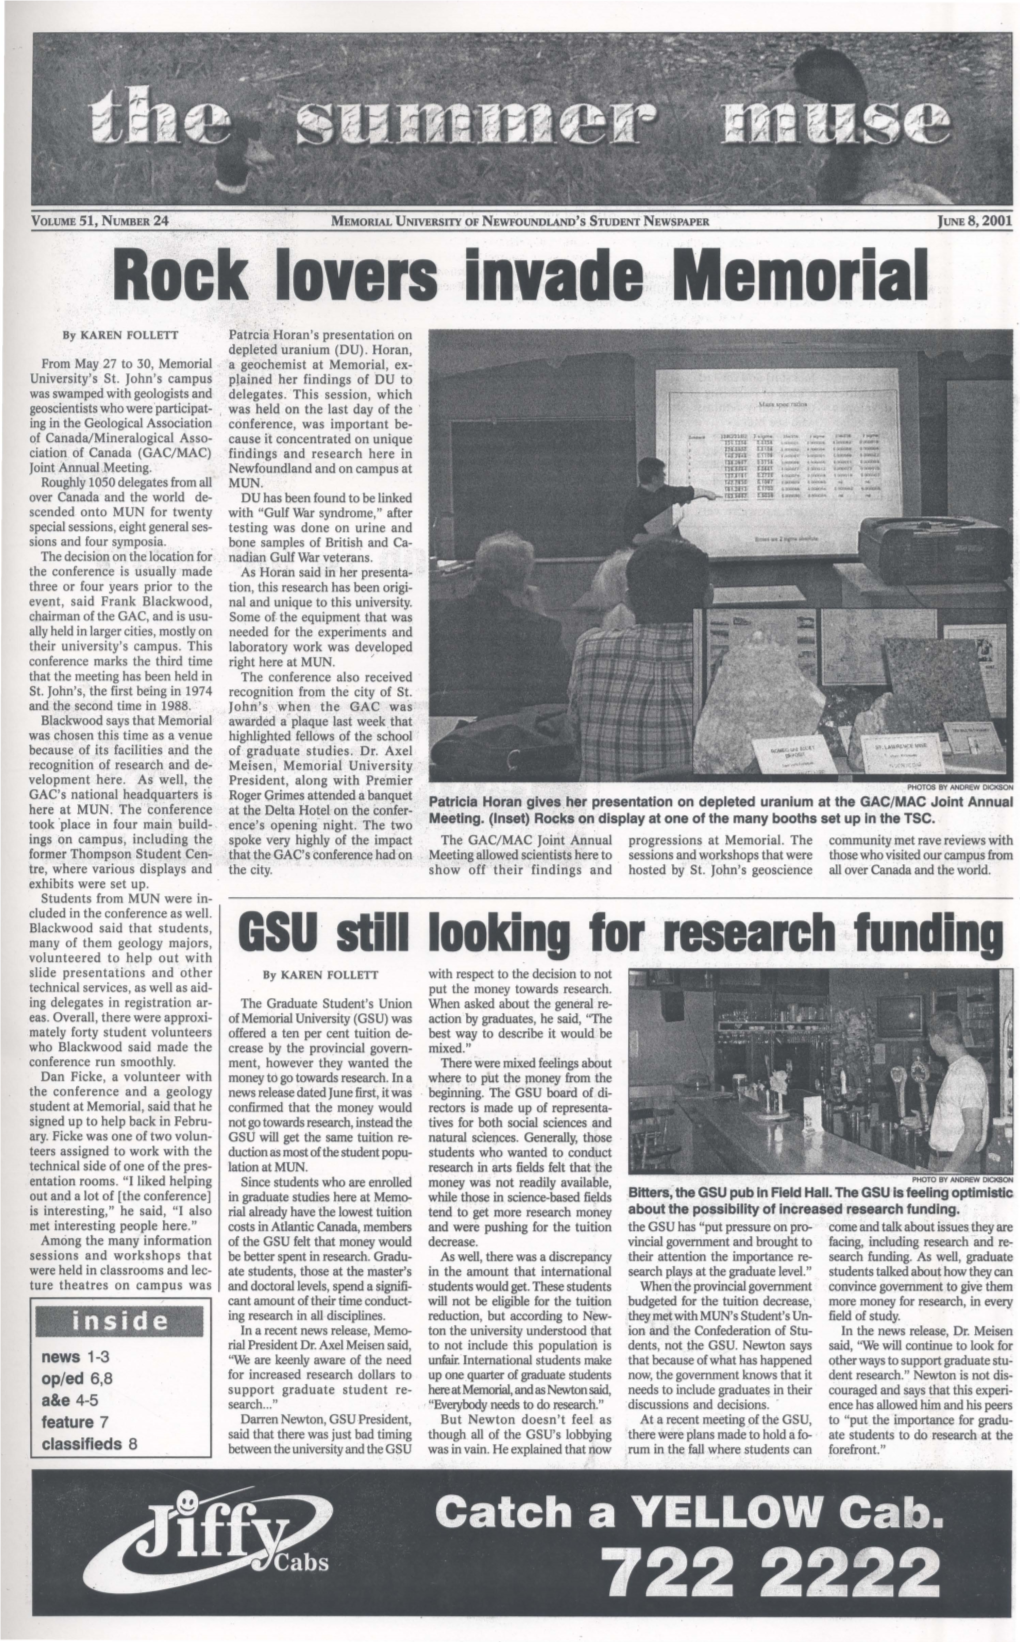 GSU · Still Looking for ·Research Funding Volunteered to Help out with Slide Presentations and Other